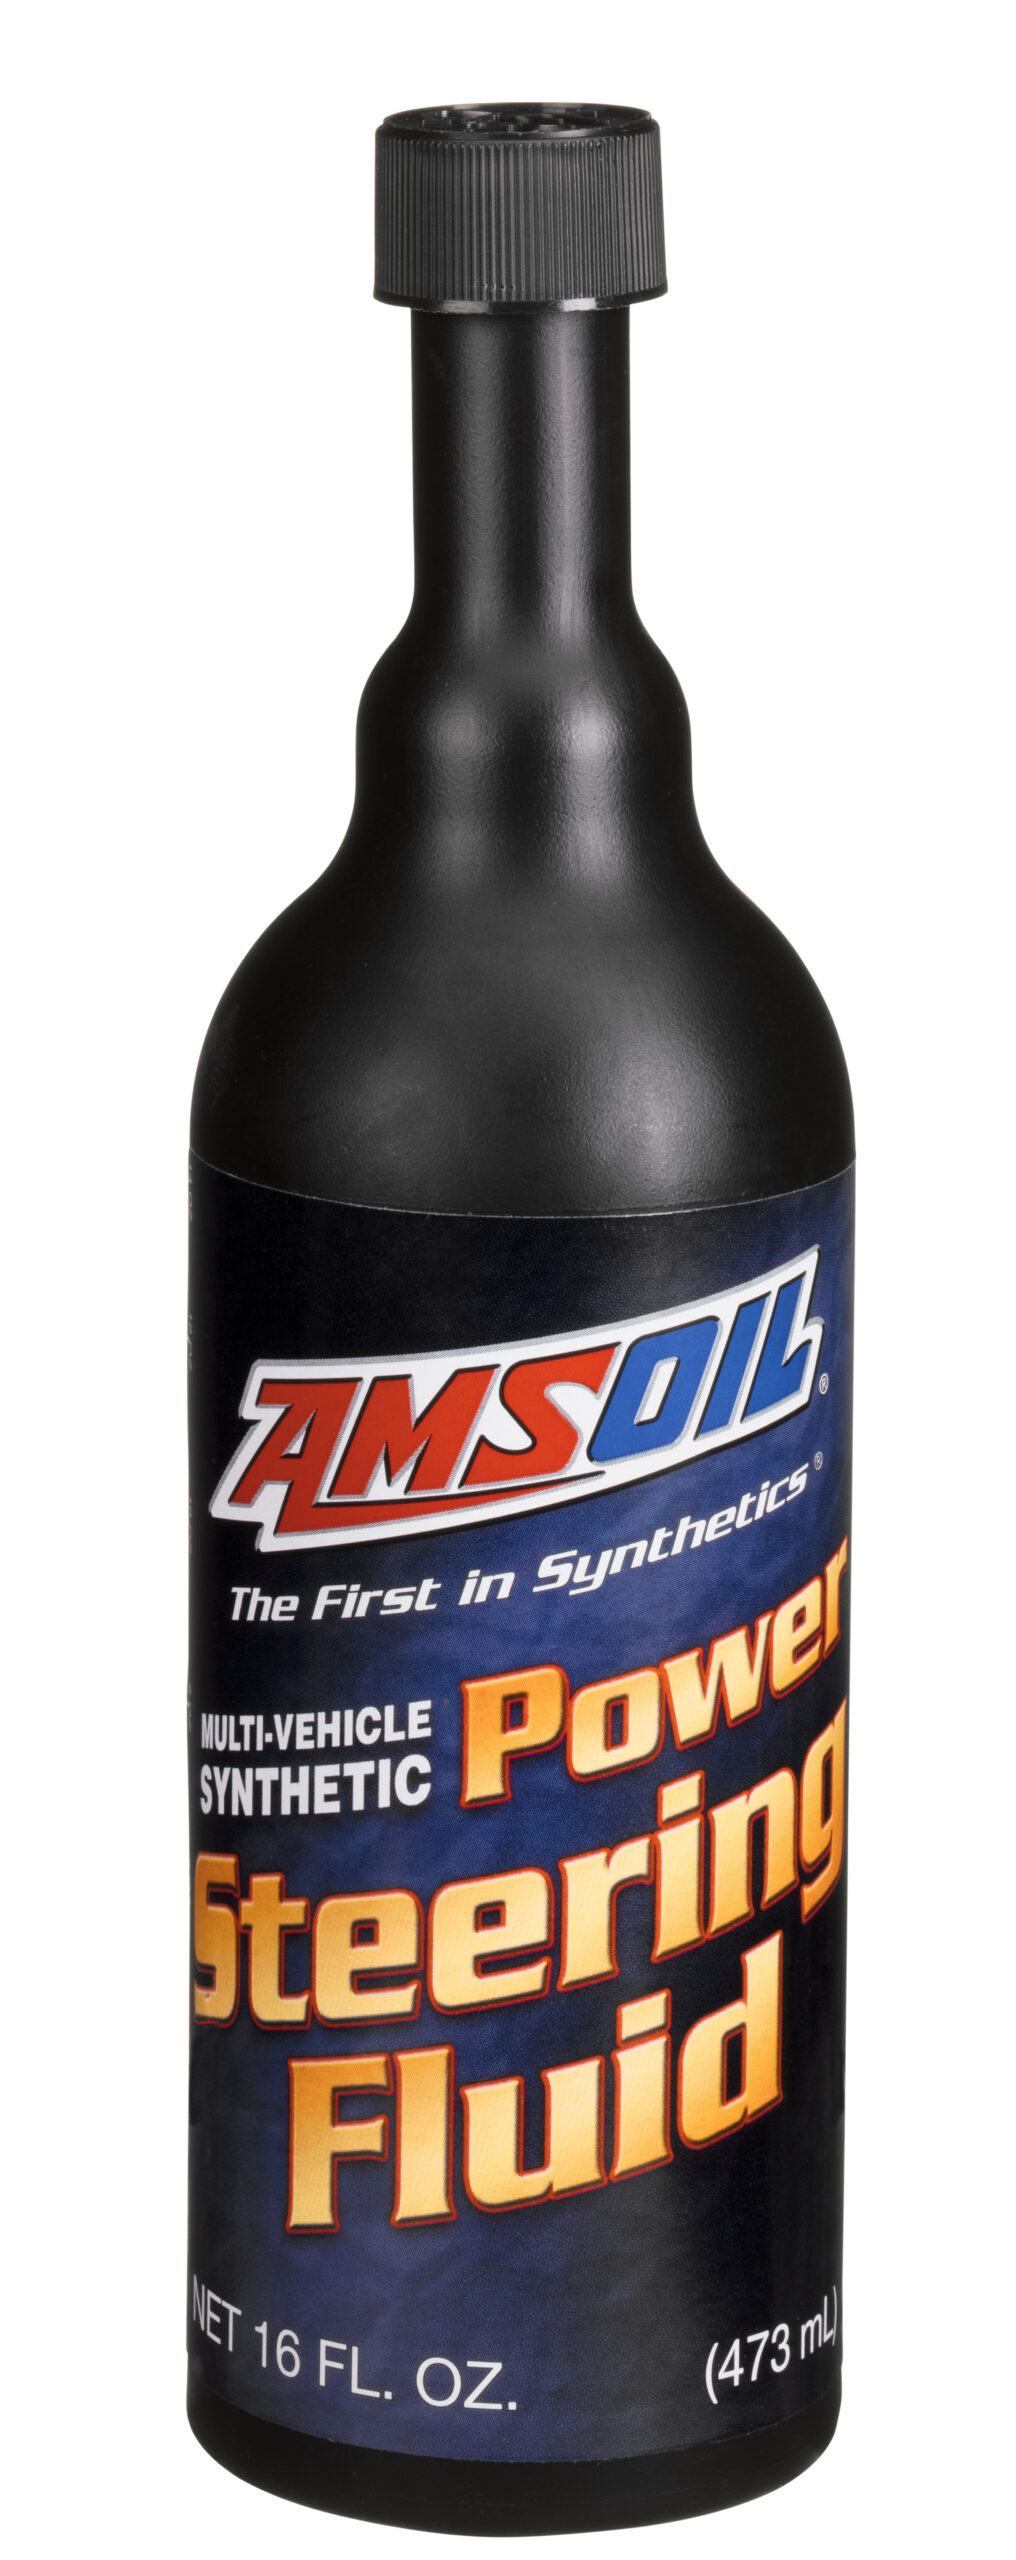 A bottle of AMSOIL Multi-Vehicle Synthetic Power Steering Fluid, designed to provide long, trouble-free service in most domestic, foreign passenger car, etc.